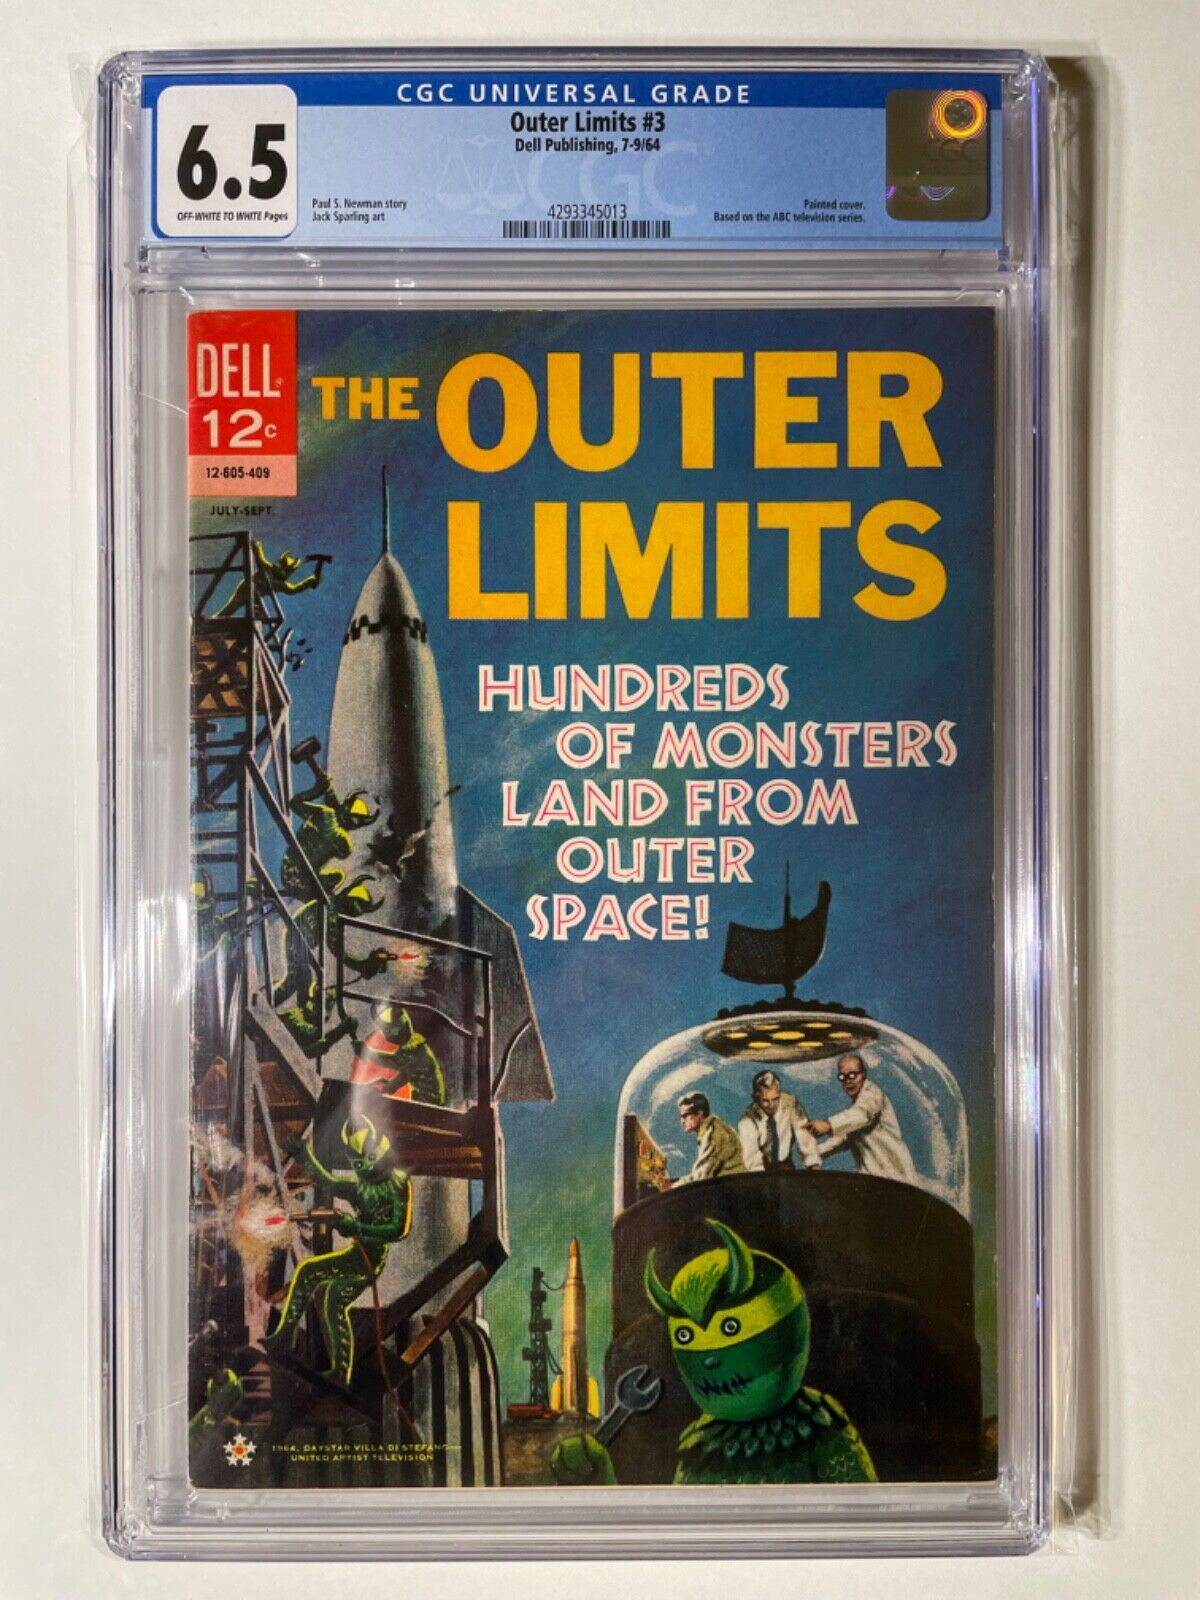 OUTER LIMITS #3 CGC 6.5 OFF WHITE/WHITE PAGES CLASSIC SCI-FI TV SHOW